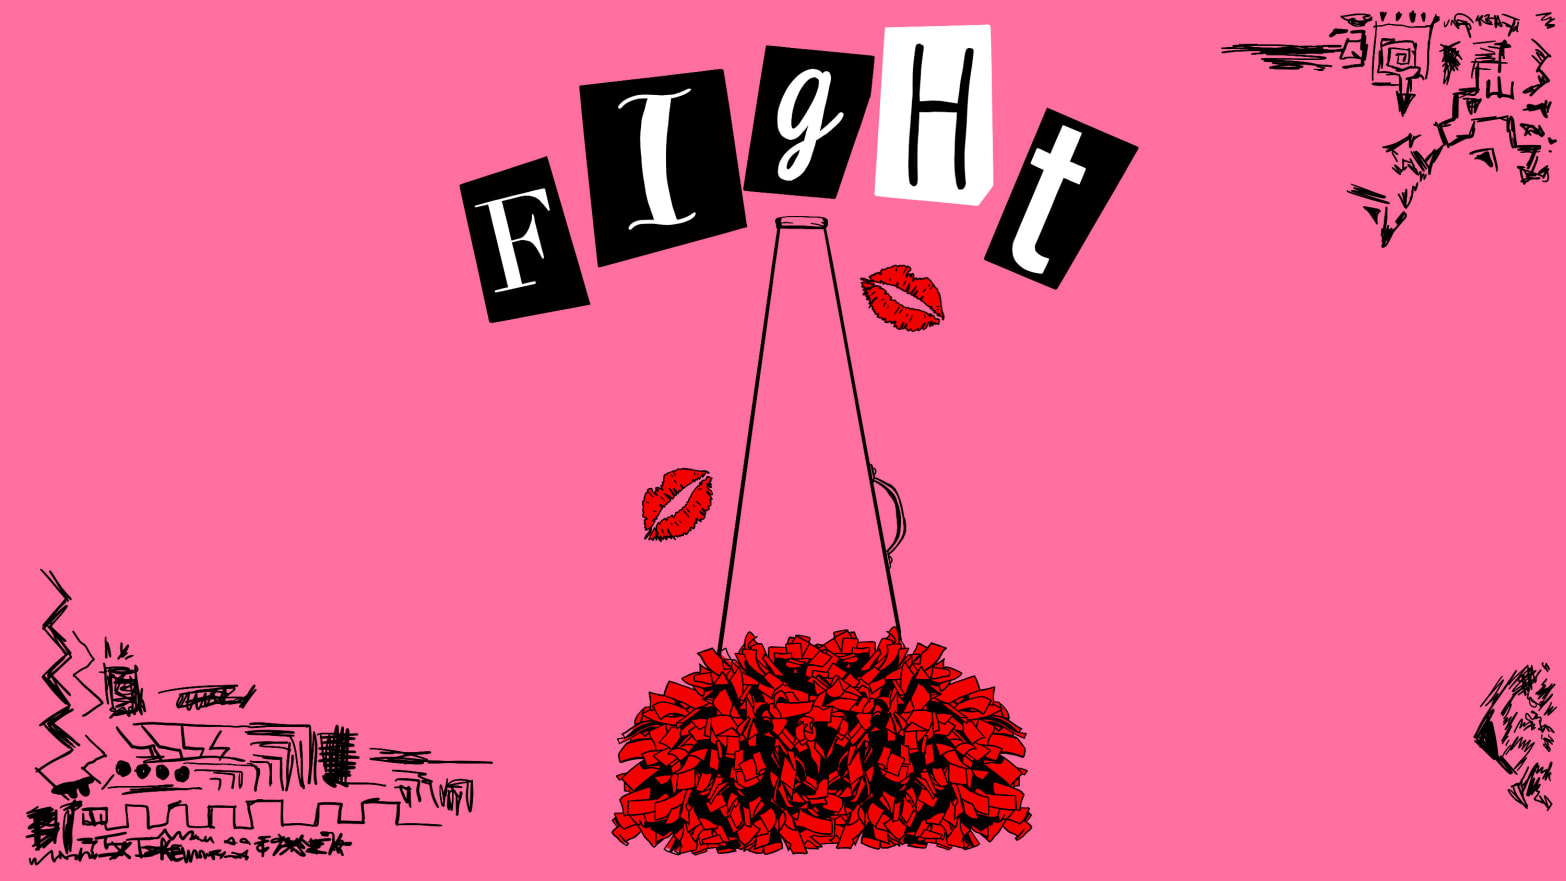 Illustration of a megaphone and pom poms with the word “fight” above them on a pink background